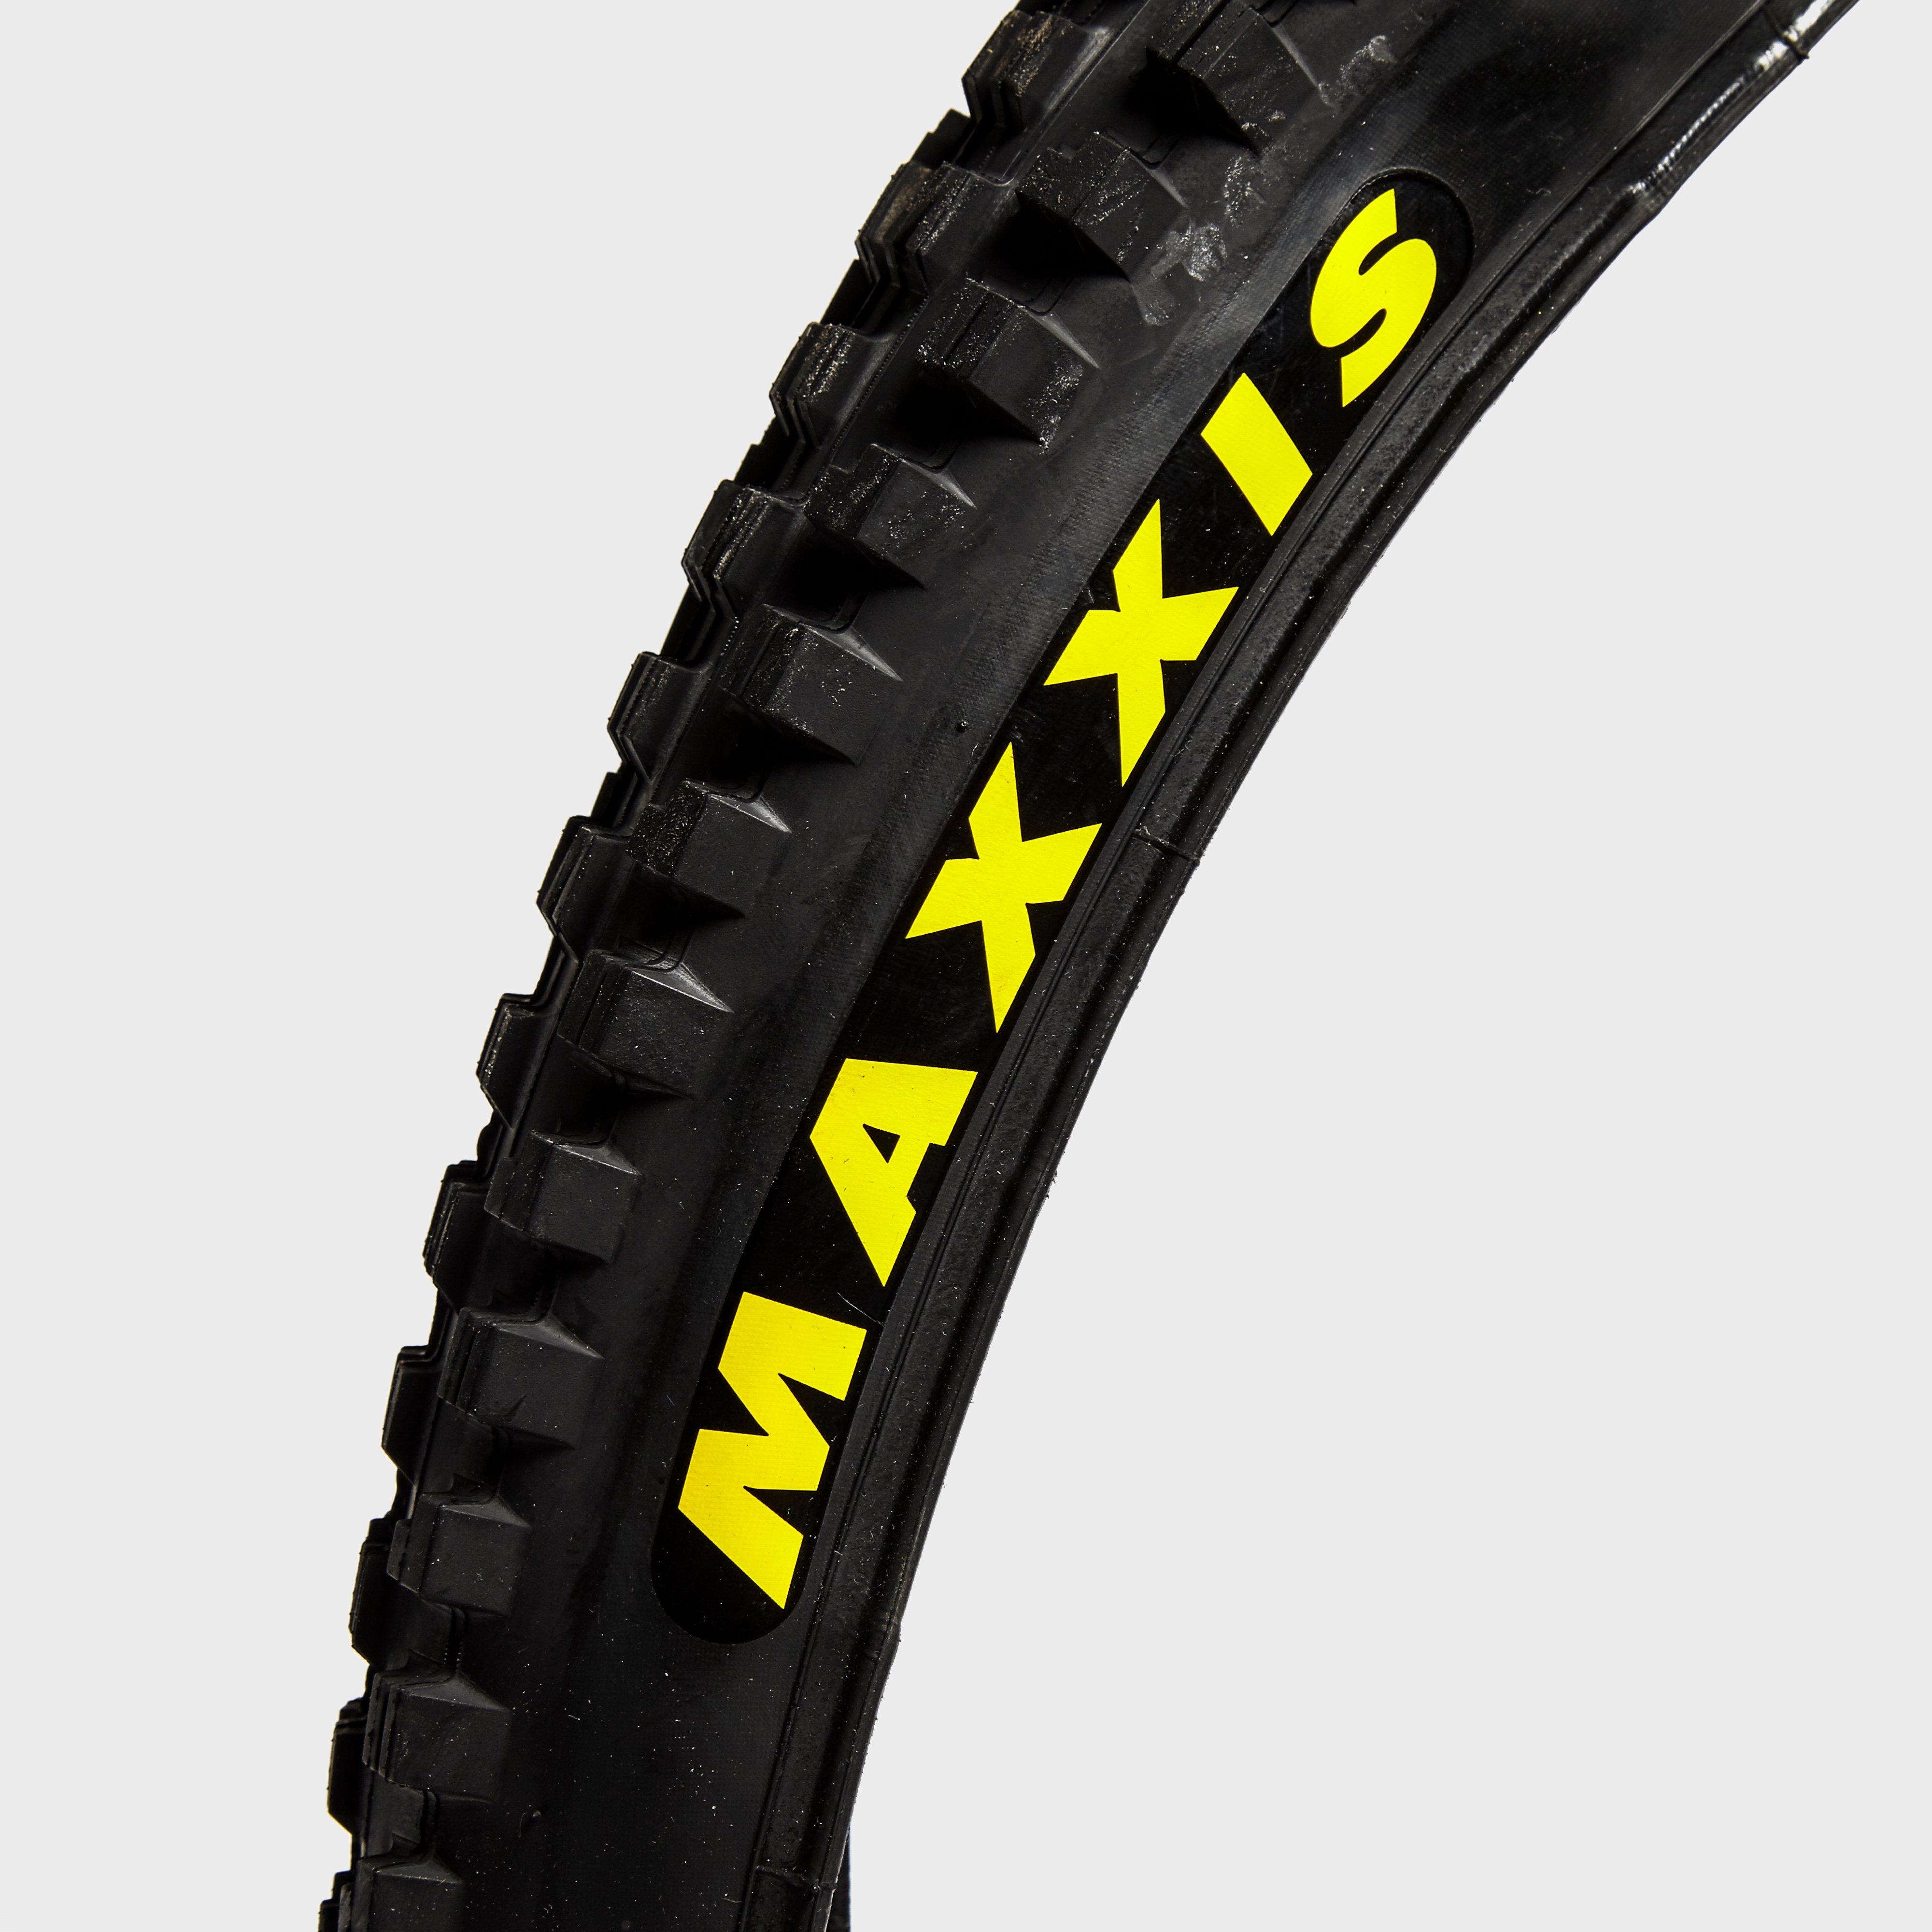 Maxxis Minion DHF MTB Tyre 29 x 2.30 Review